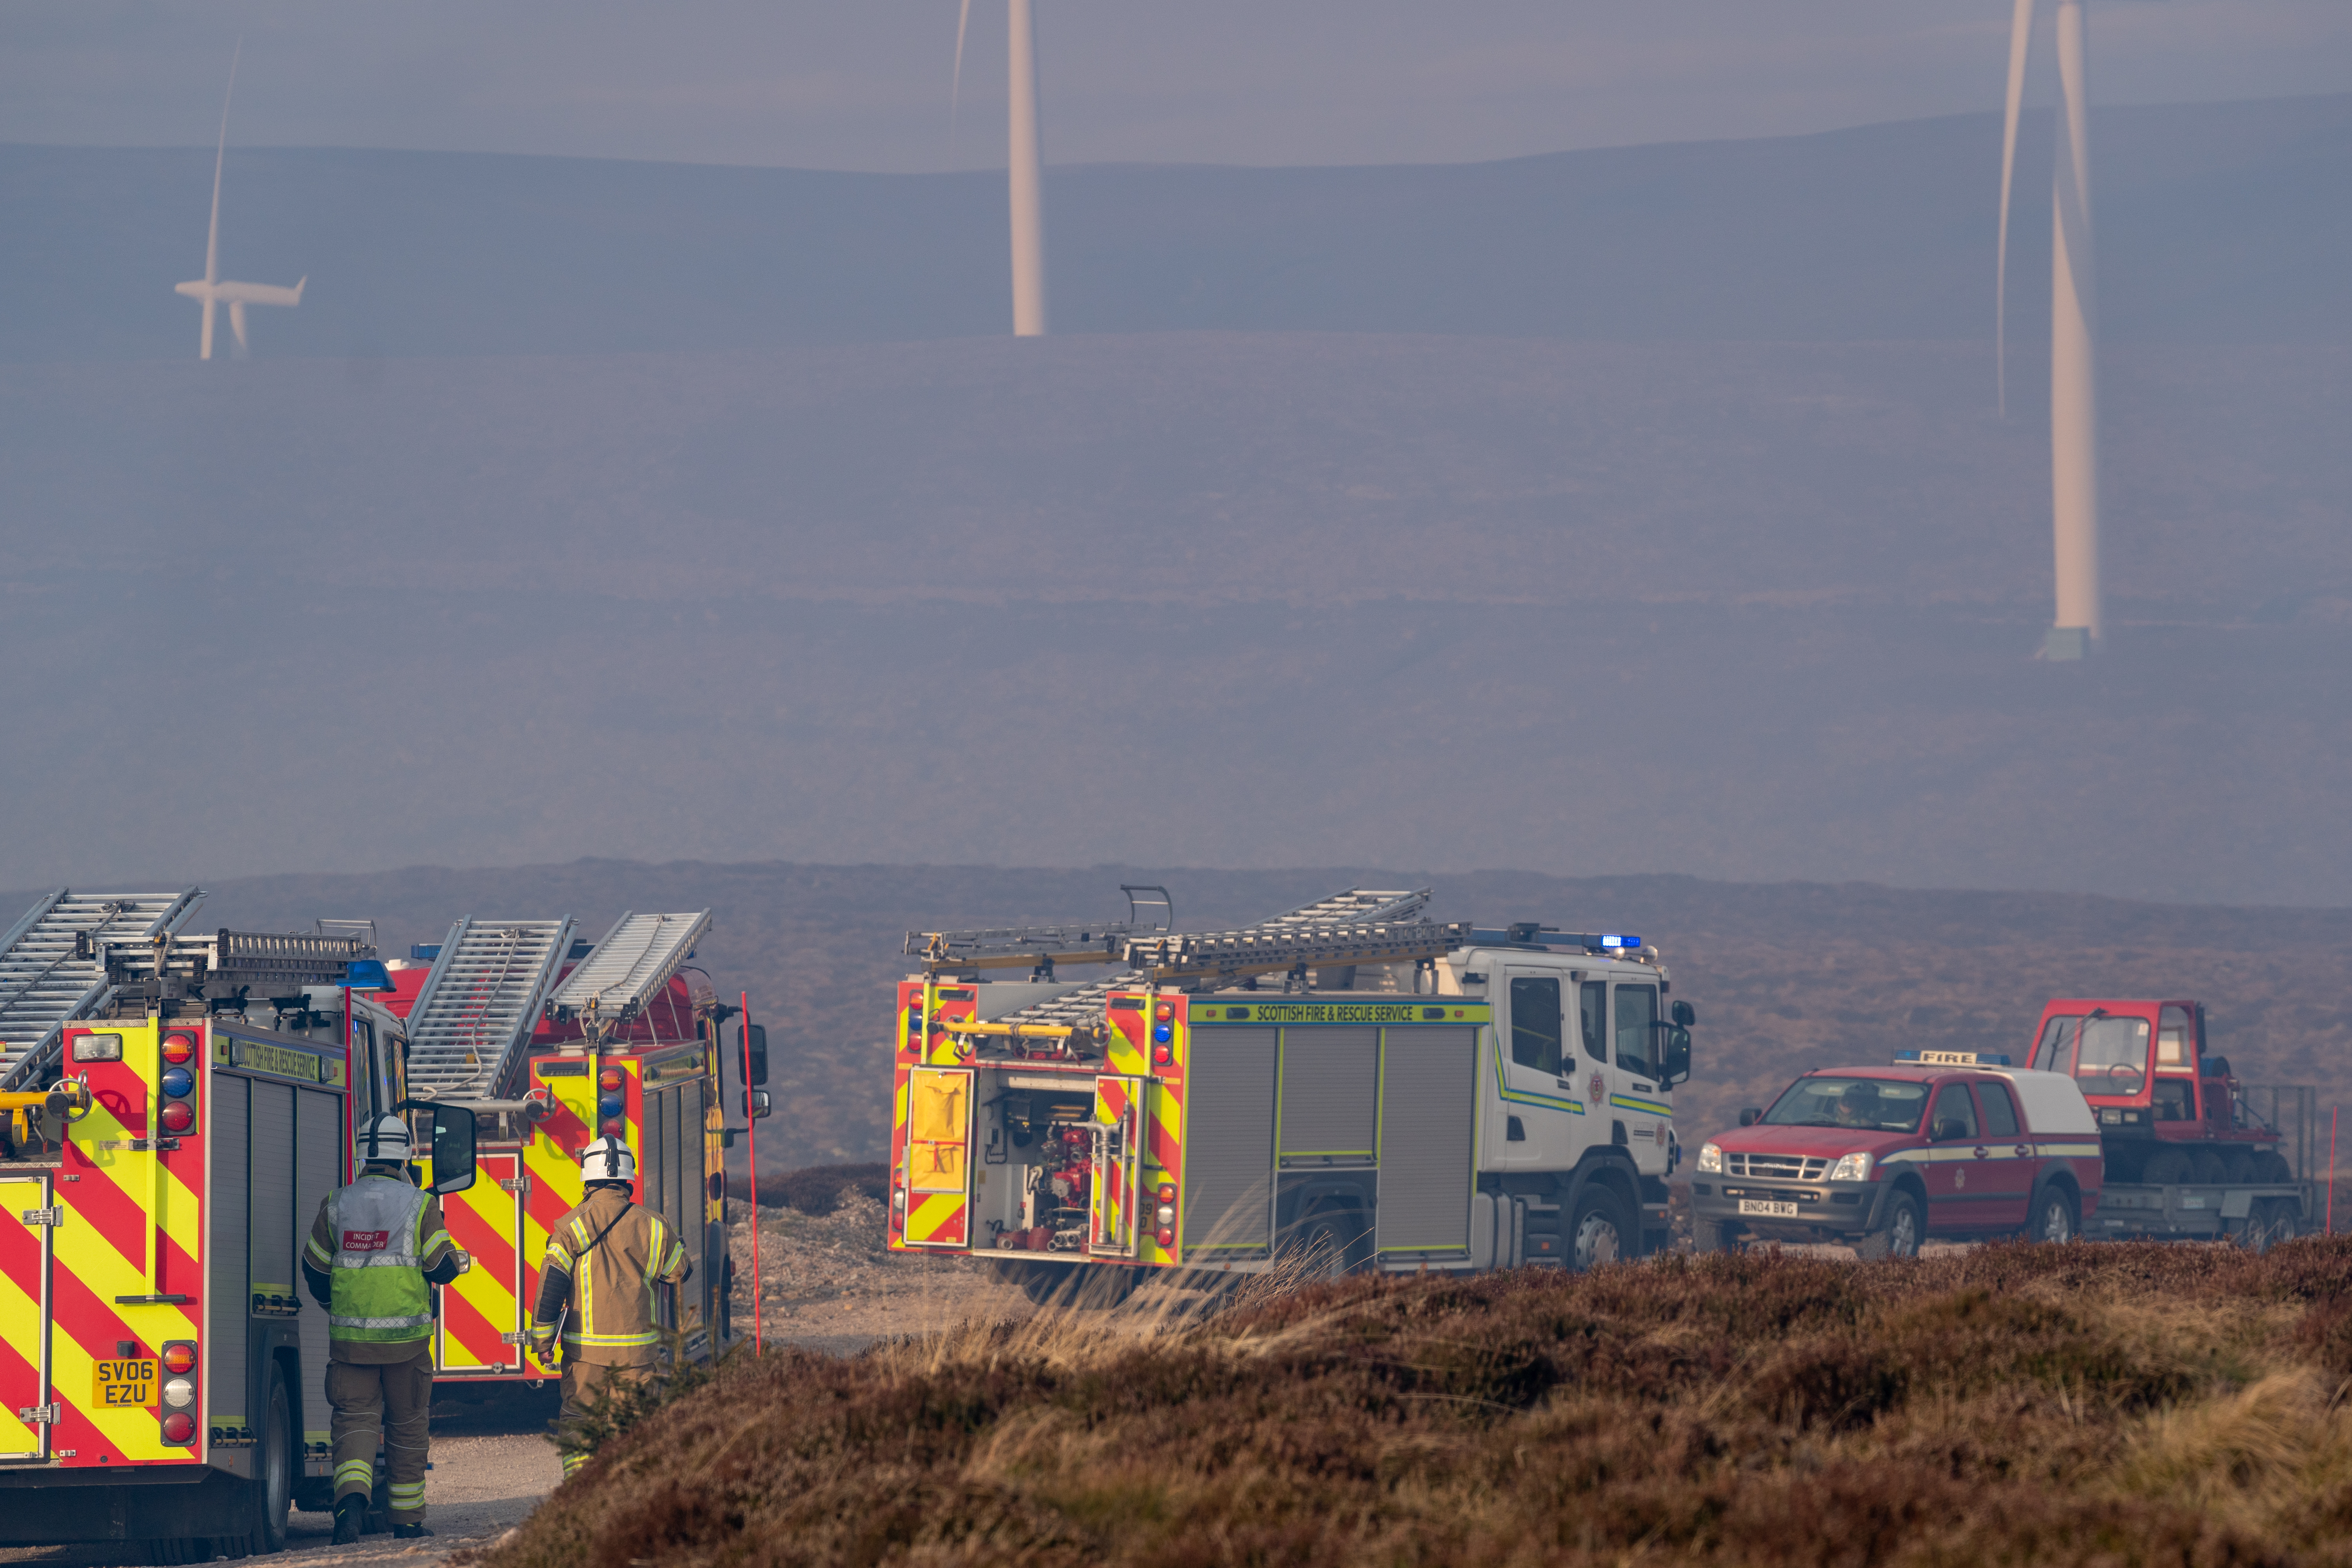 This is the scene of the Fire Units within Pauls Hill Wind Farm, Moray, Scotland on Sunday 14 April 2019. It is understood that there are 7 units in attendance, however, the Fire is some distance away to reach. Photographed by JASPERIMAGE ©